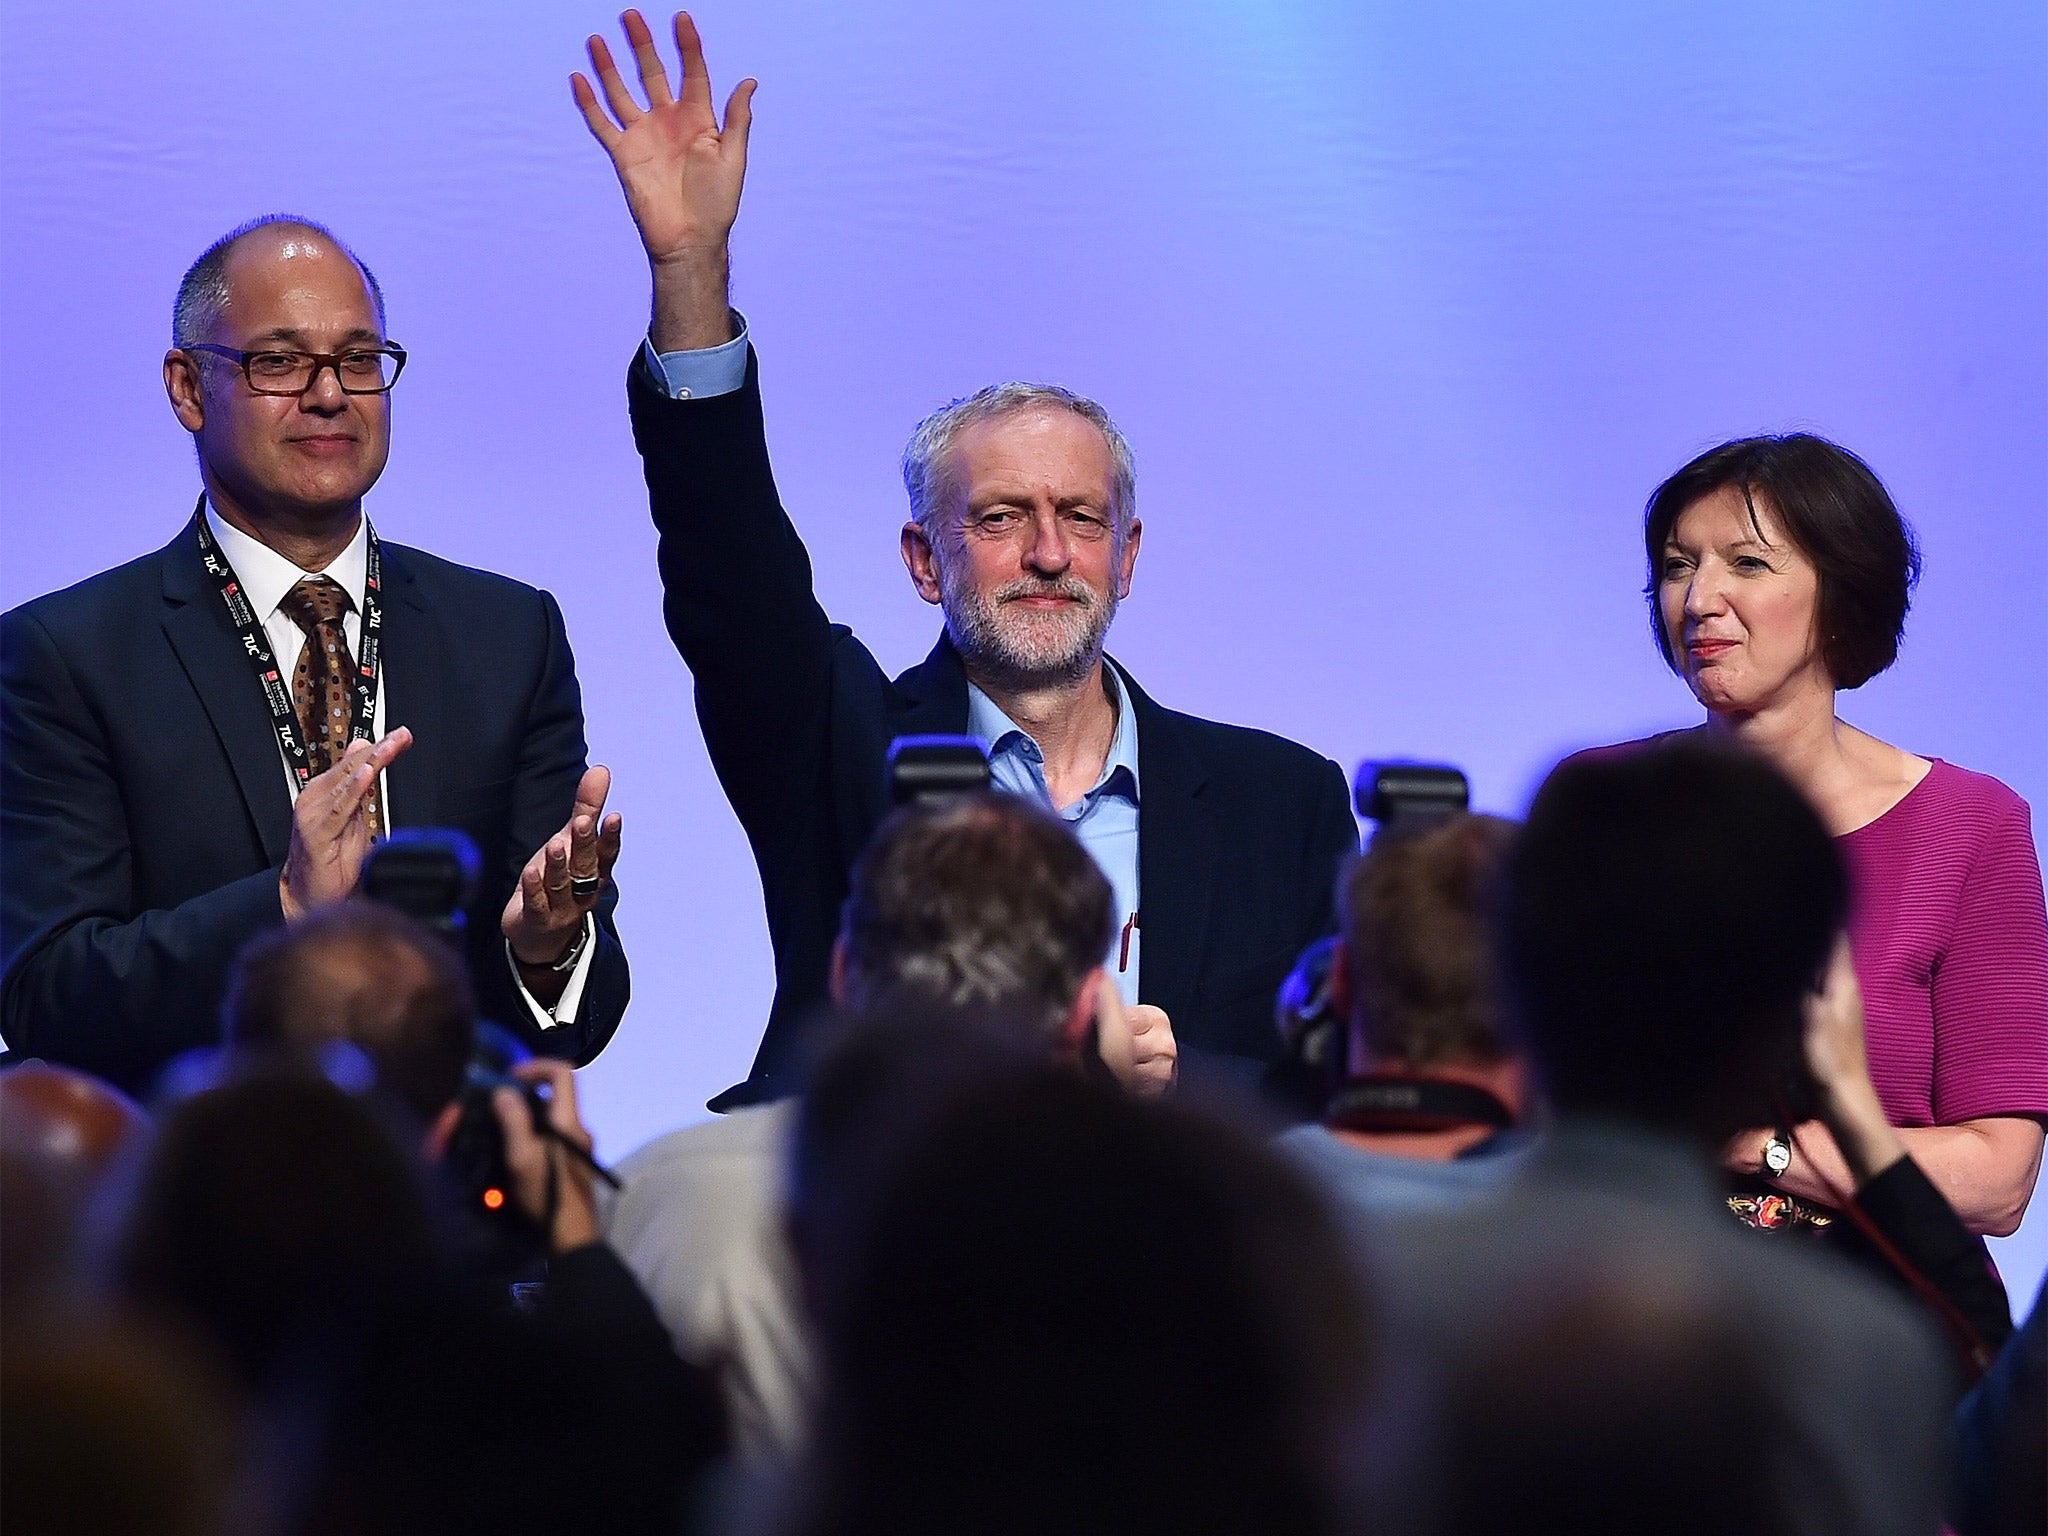 Labour leader Jeremy Corbyn acknowledges the applause after speaking at the TUC conference in Brighton